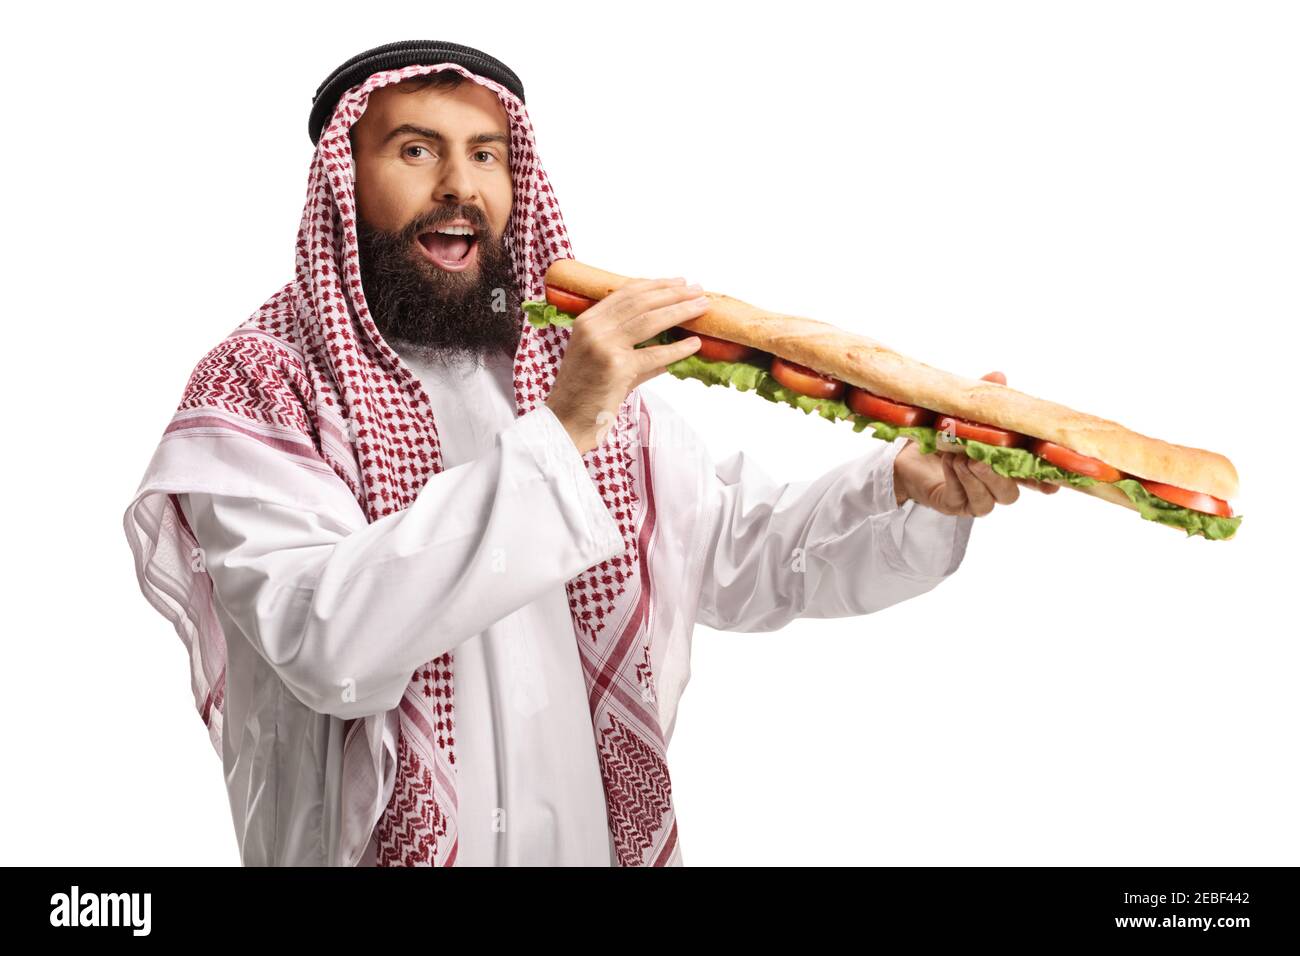 Happy arab man eating a long baguette sandwich isolated on white background Stock Photo